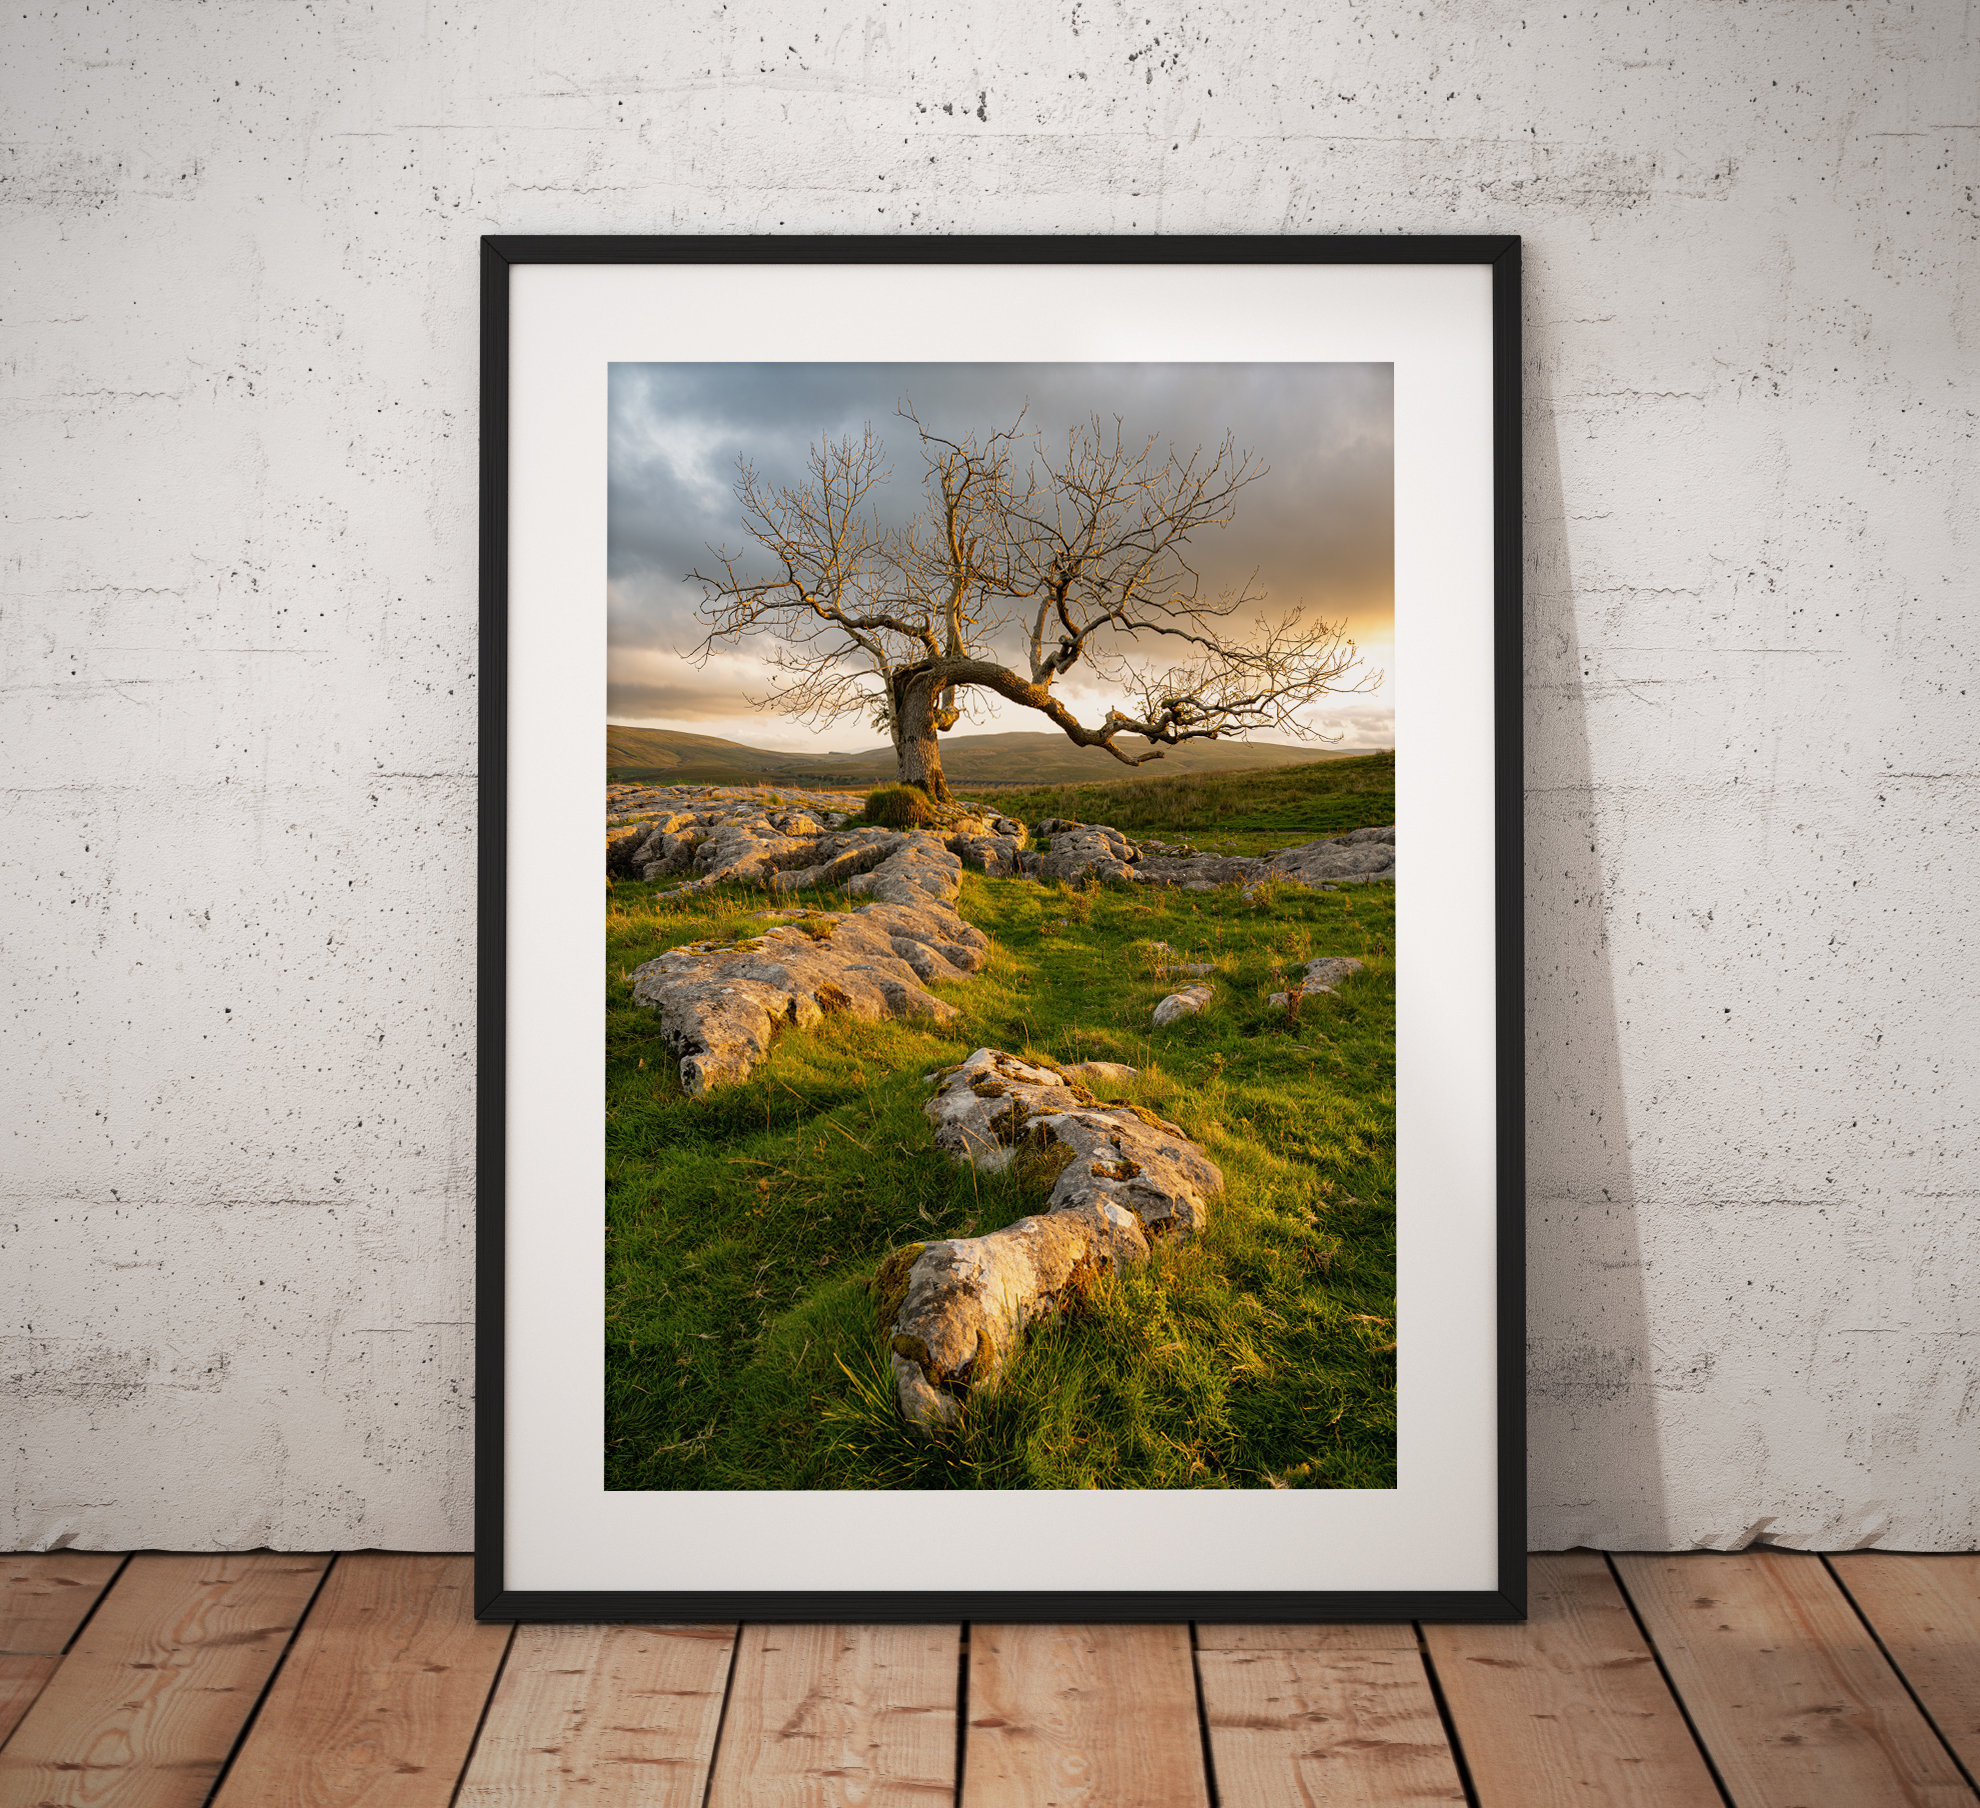 Photograph of a dramatic Lone tree on Limestone pavement showing the warm sunrise glow in the Yorkshire Dales. England, Fine Art, Home Decor